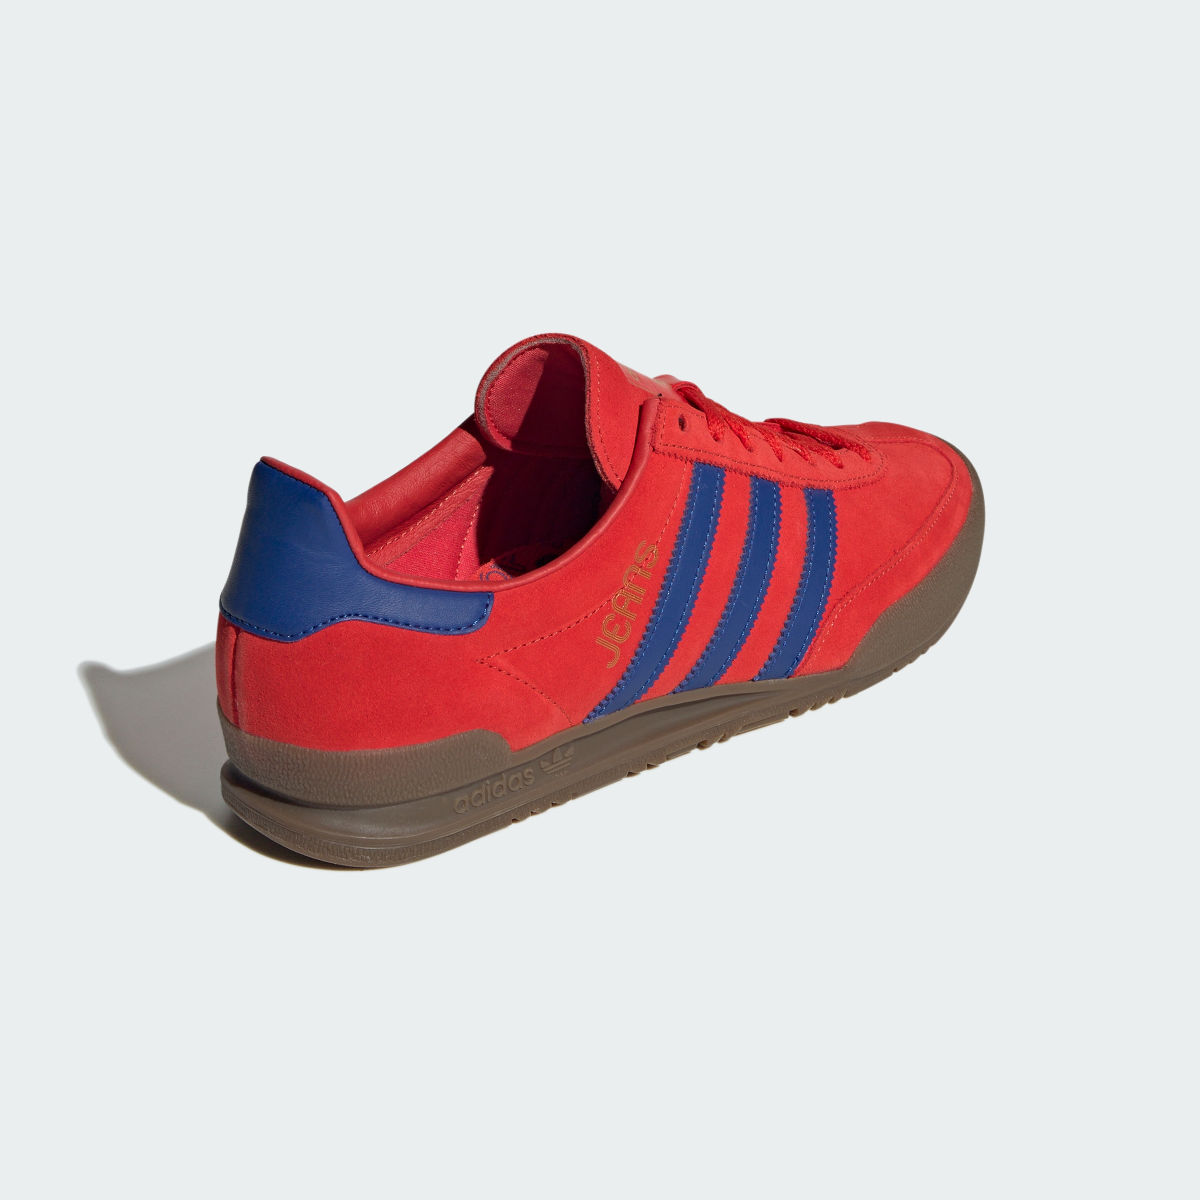 Adidas Jeans Shoes. 6